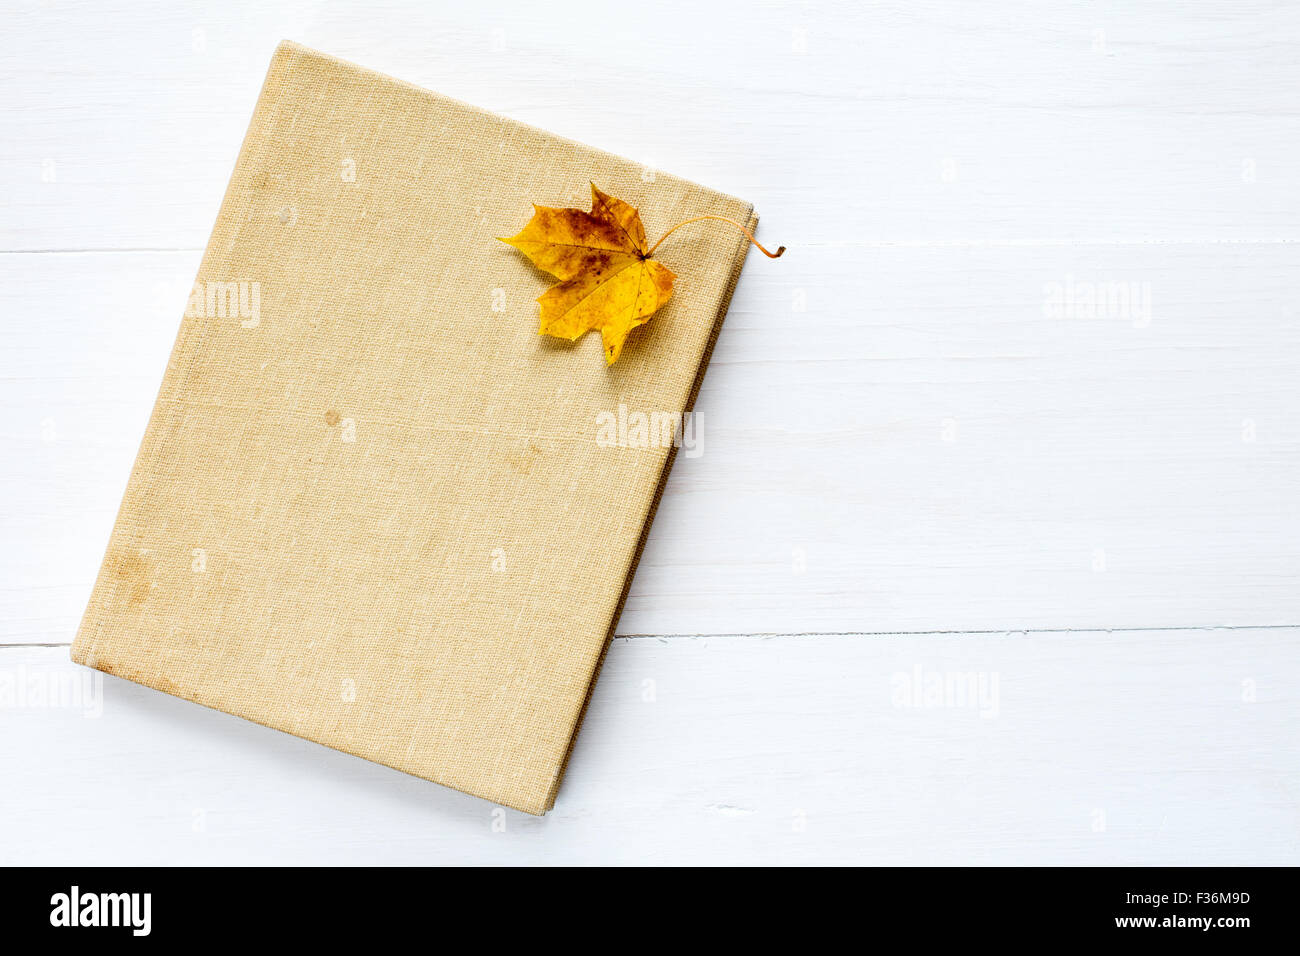 Book and old leaf on wooden background with copy-space Stock Photo